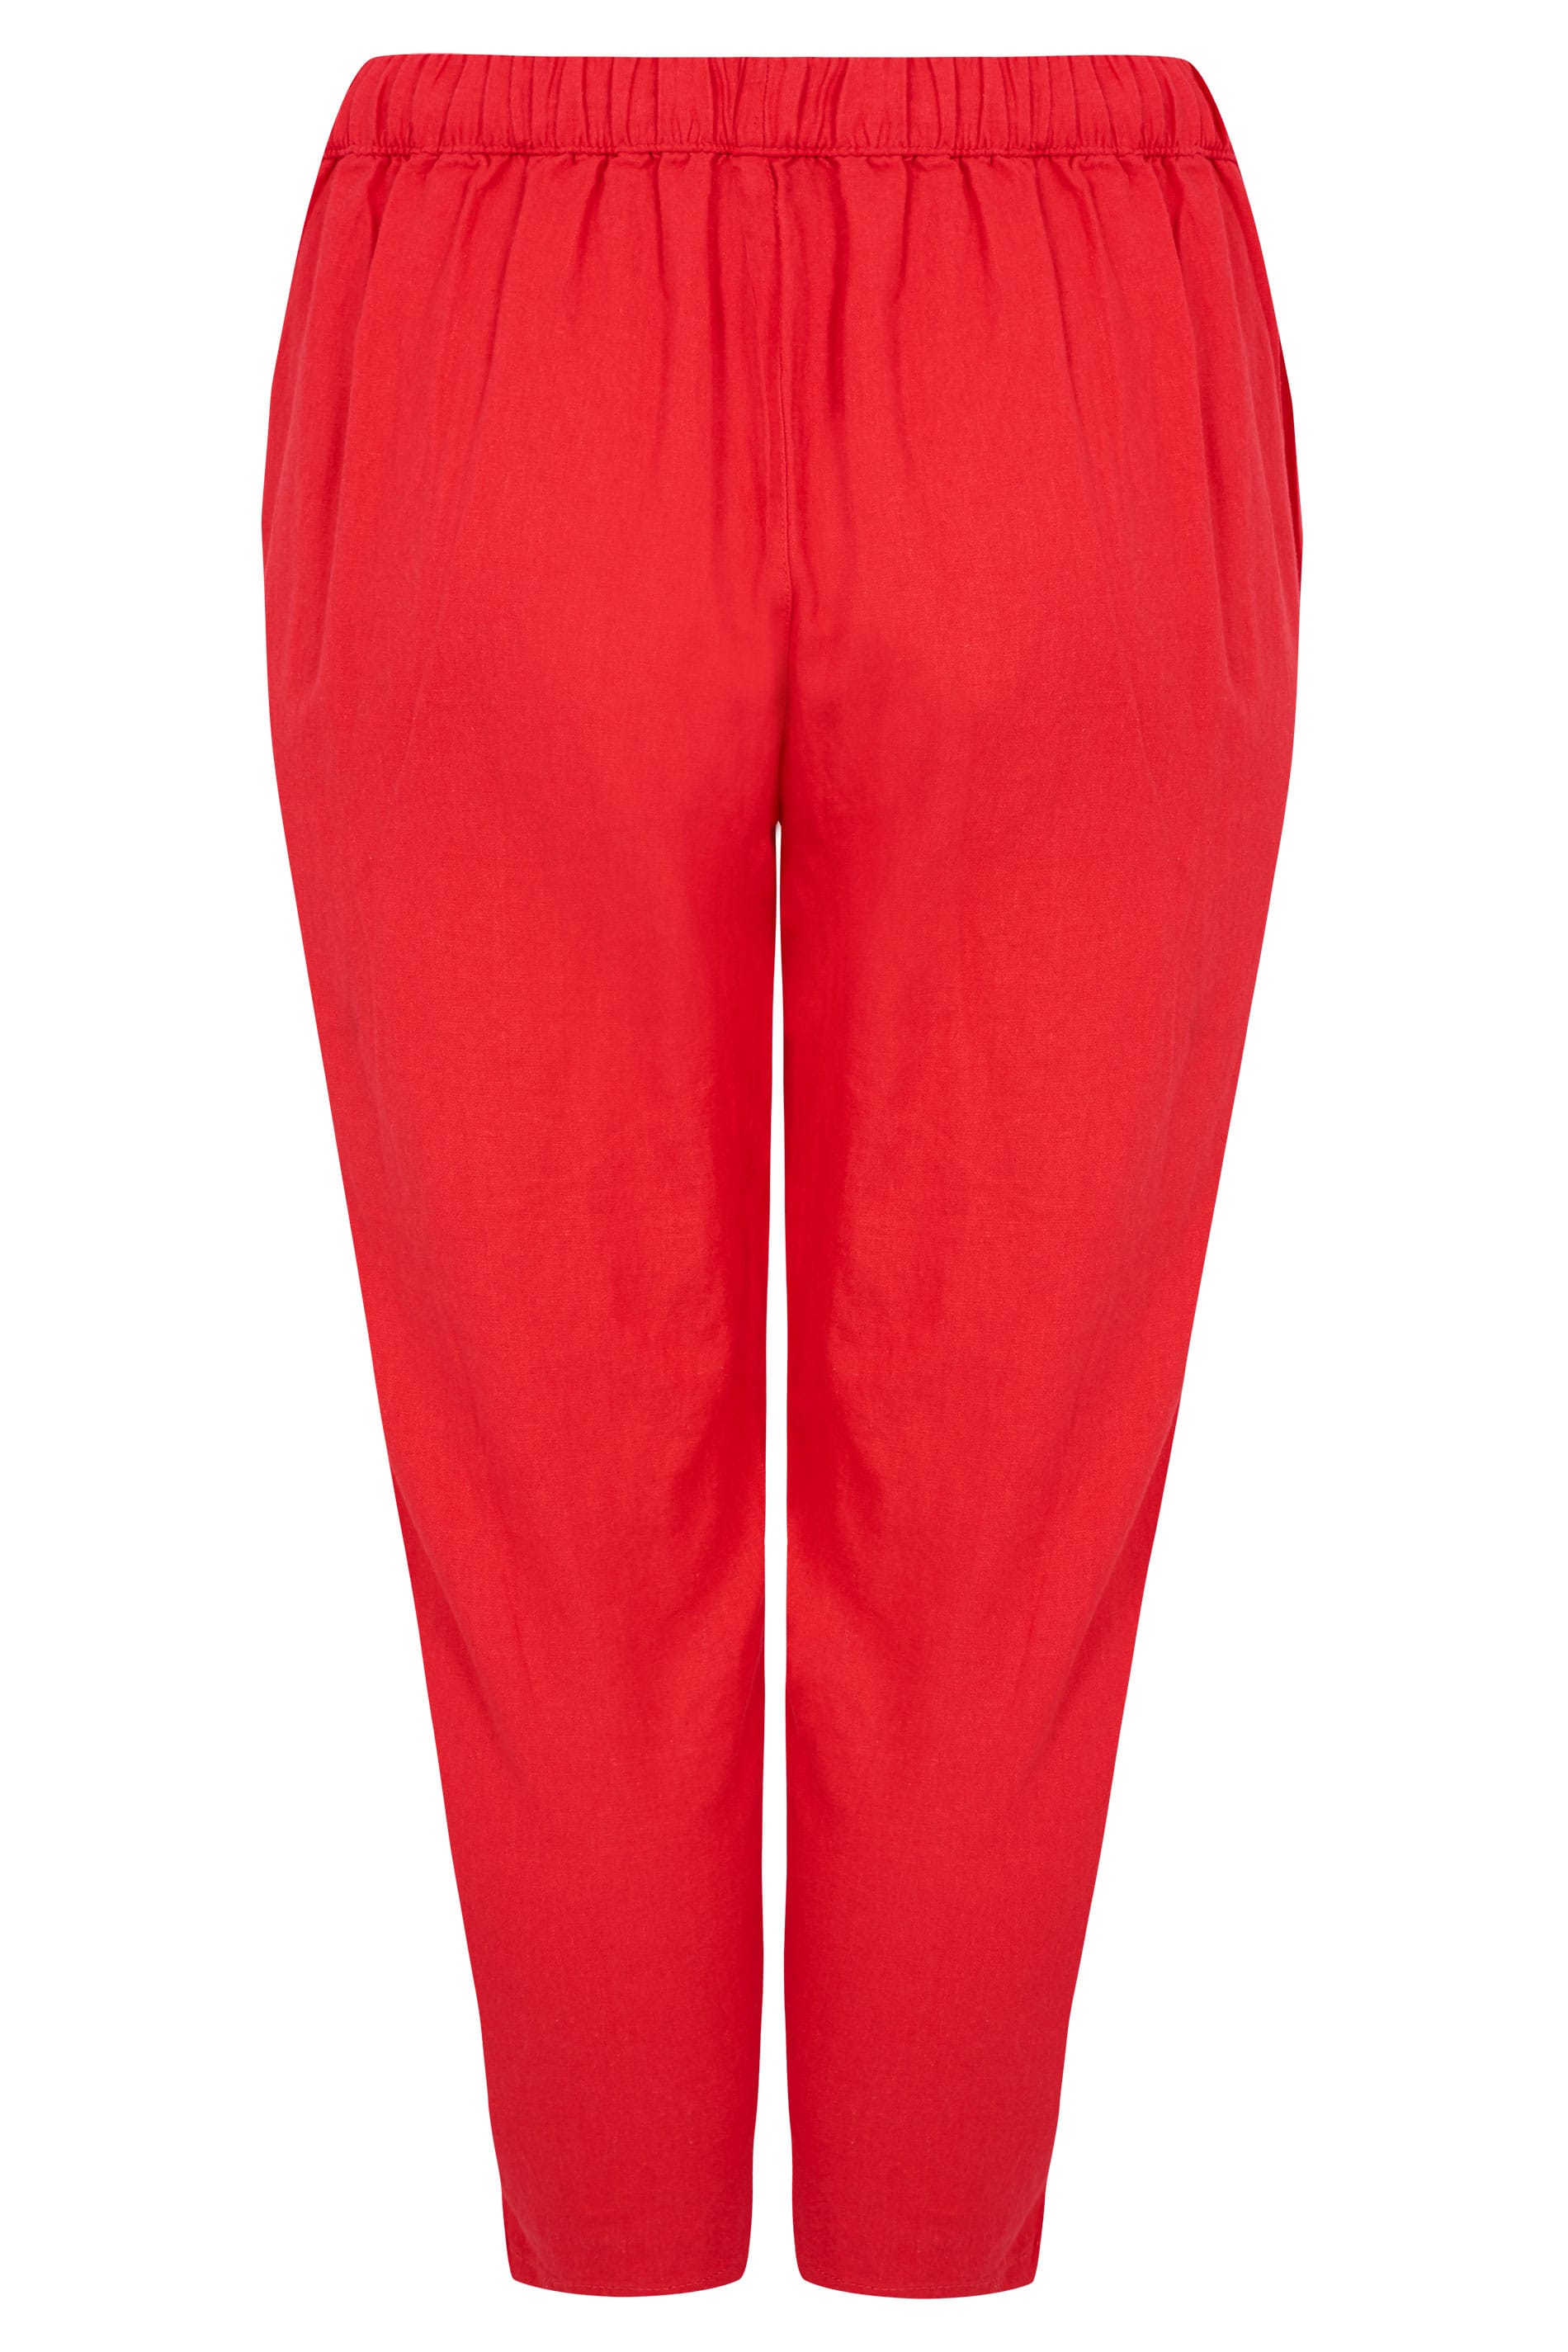 Red Linen Mix Cropped Trousers | Sizes 16 to 36 | Yours Clothing